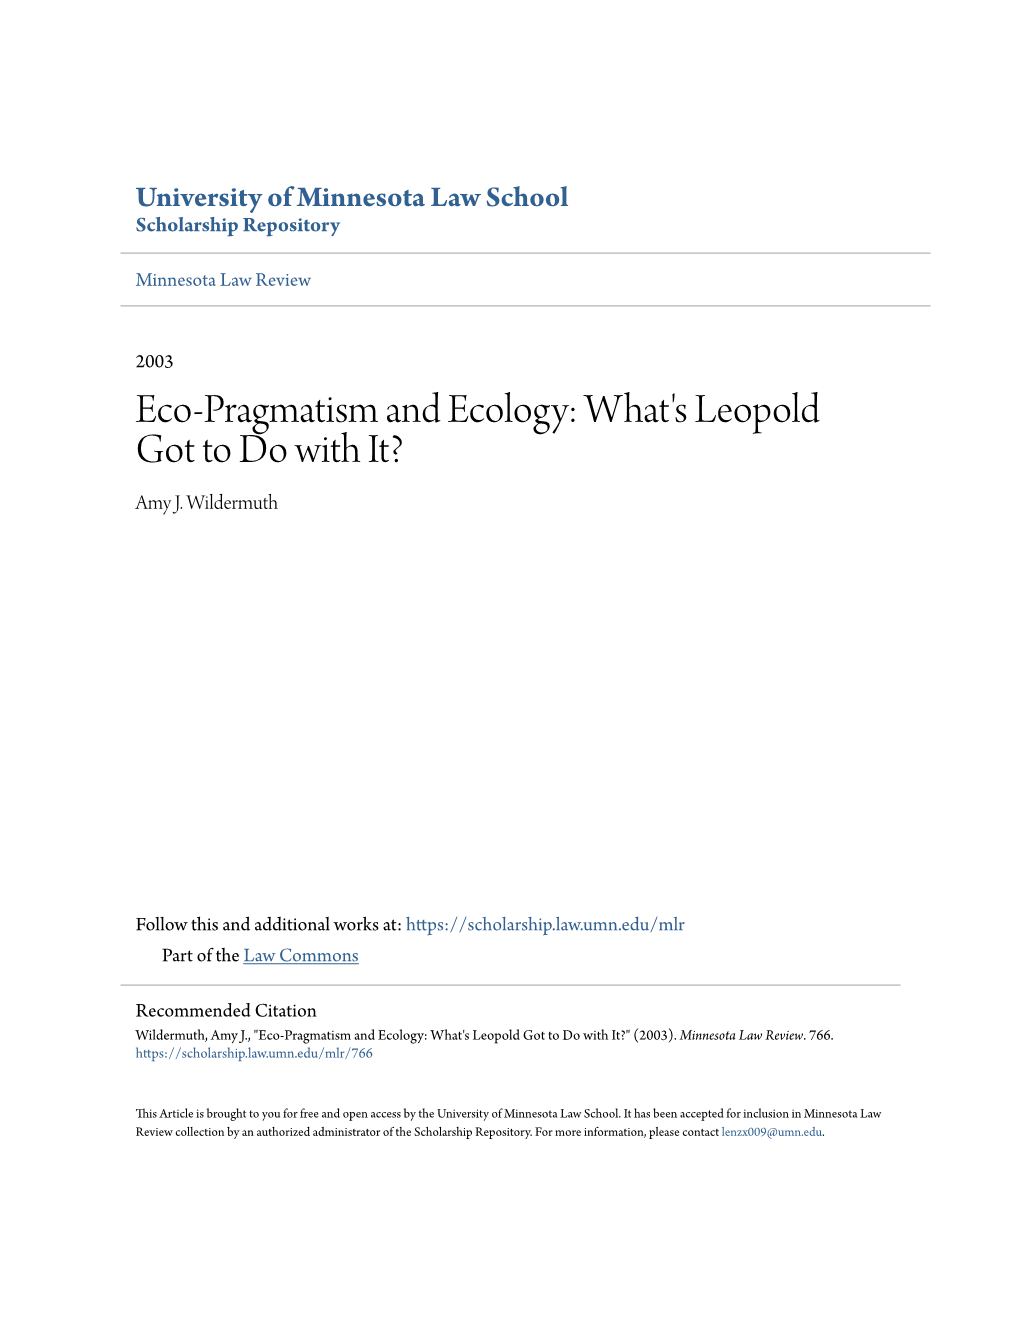 Eco-Pragmatism and Ecology: What's Leopold Got to Do with It? Amy J